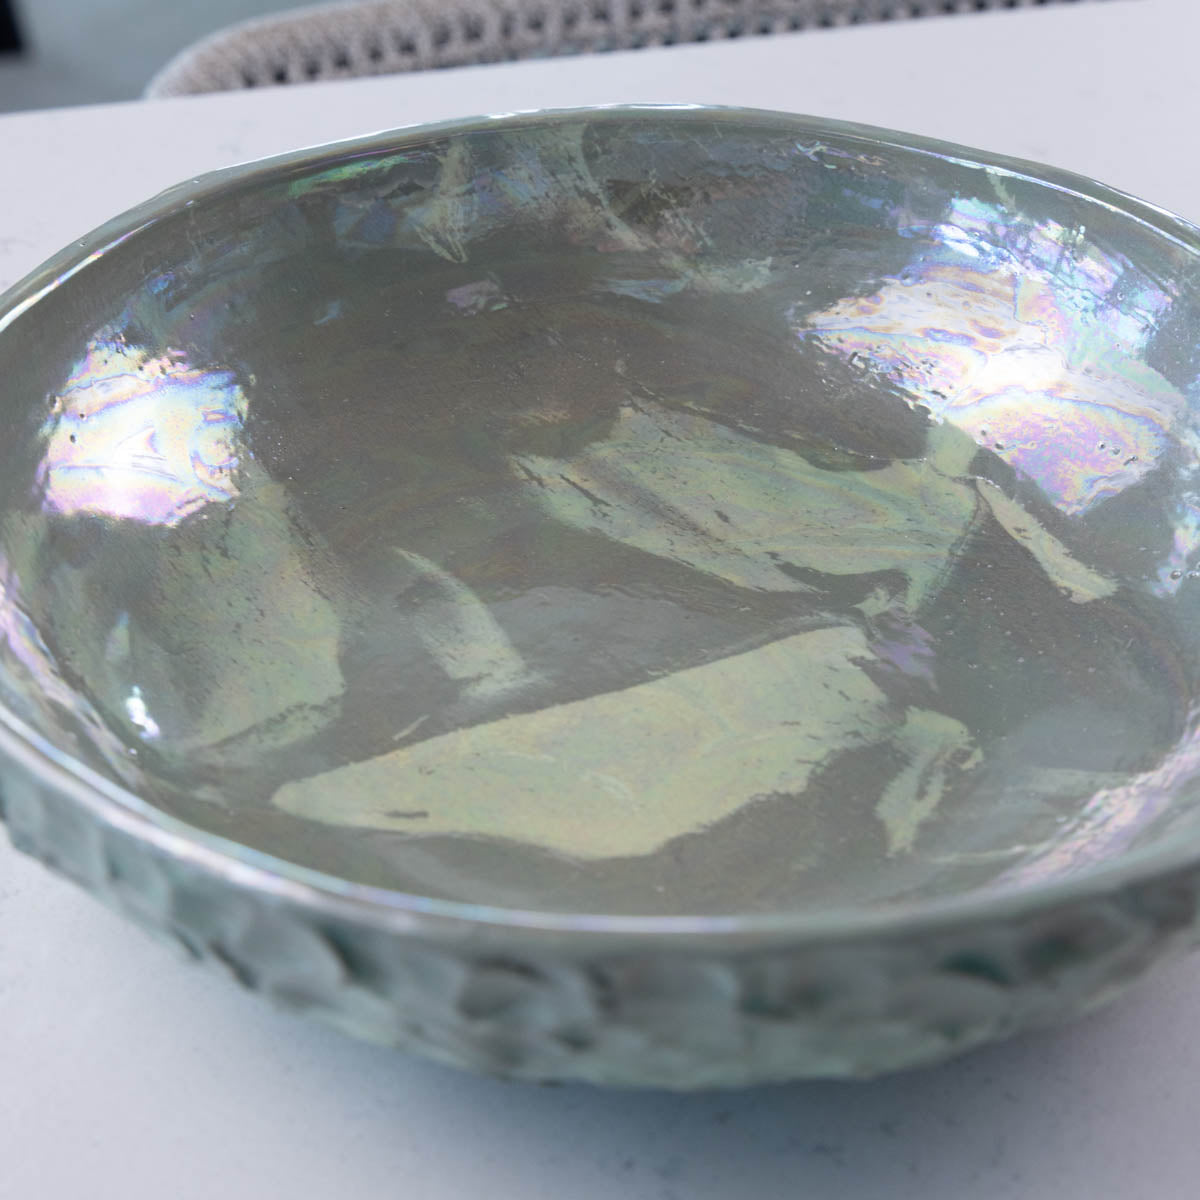 Large Nerikomi Stoneware "Mother of Pearl" Serving/Decorative Bowl - Greens & Creams (Alchemy Collection)